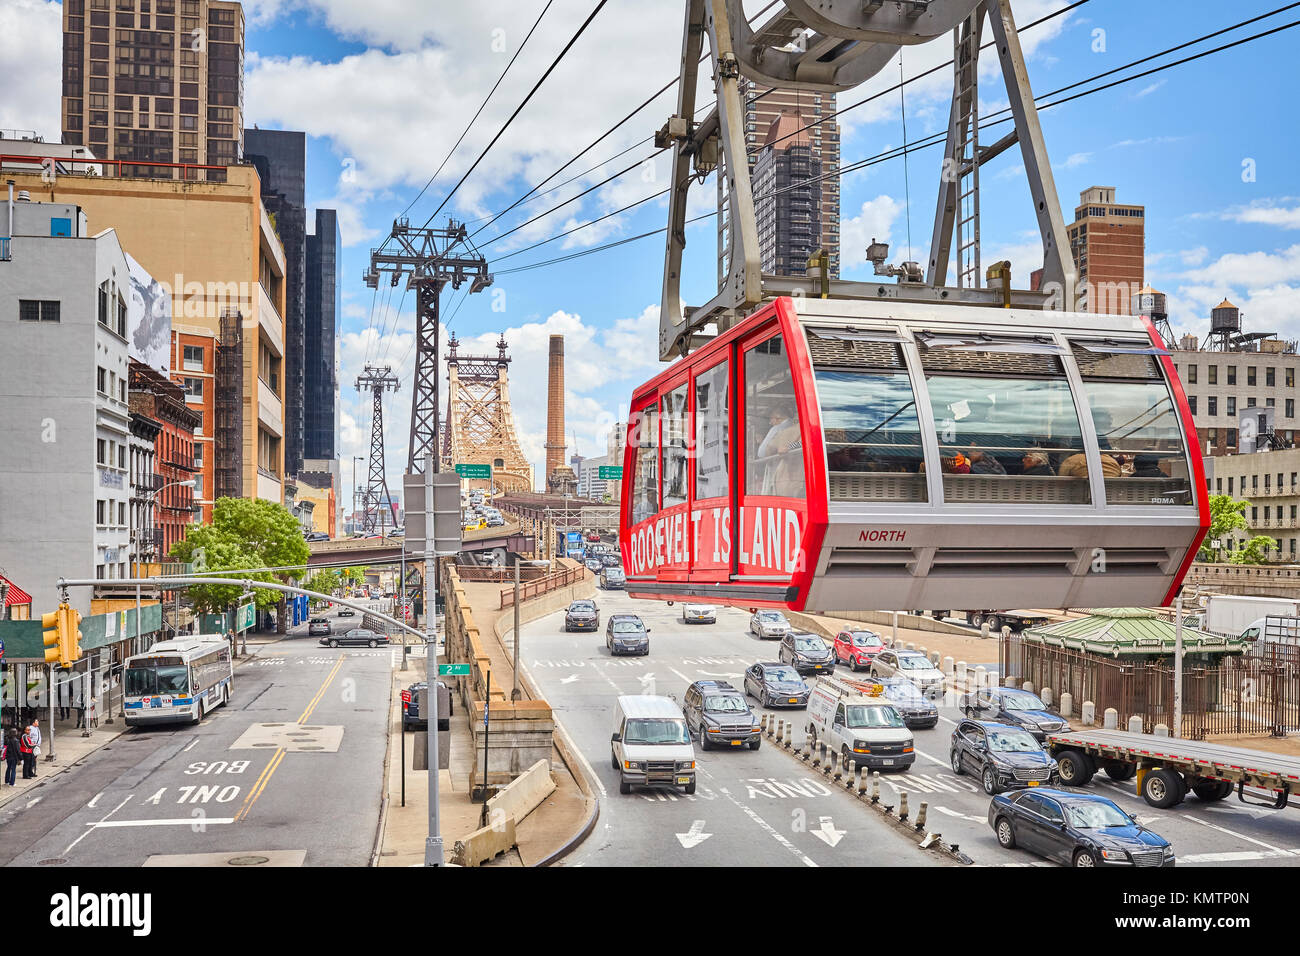 New York, USA - May 26, 2017: Cable car arrives at Manhattan station. The tram connects Roosevelt Island to the Upper East Side of Manhattan. Stock Photo